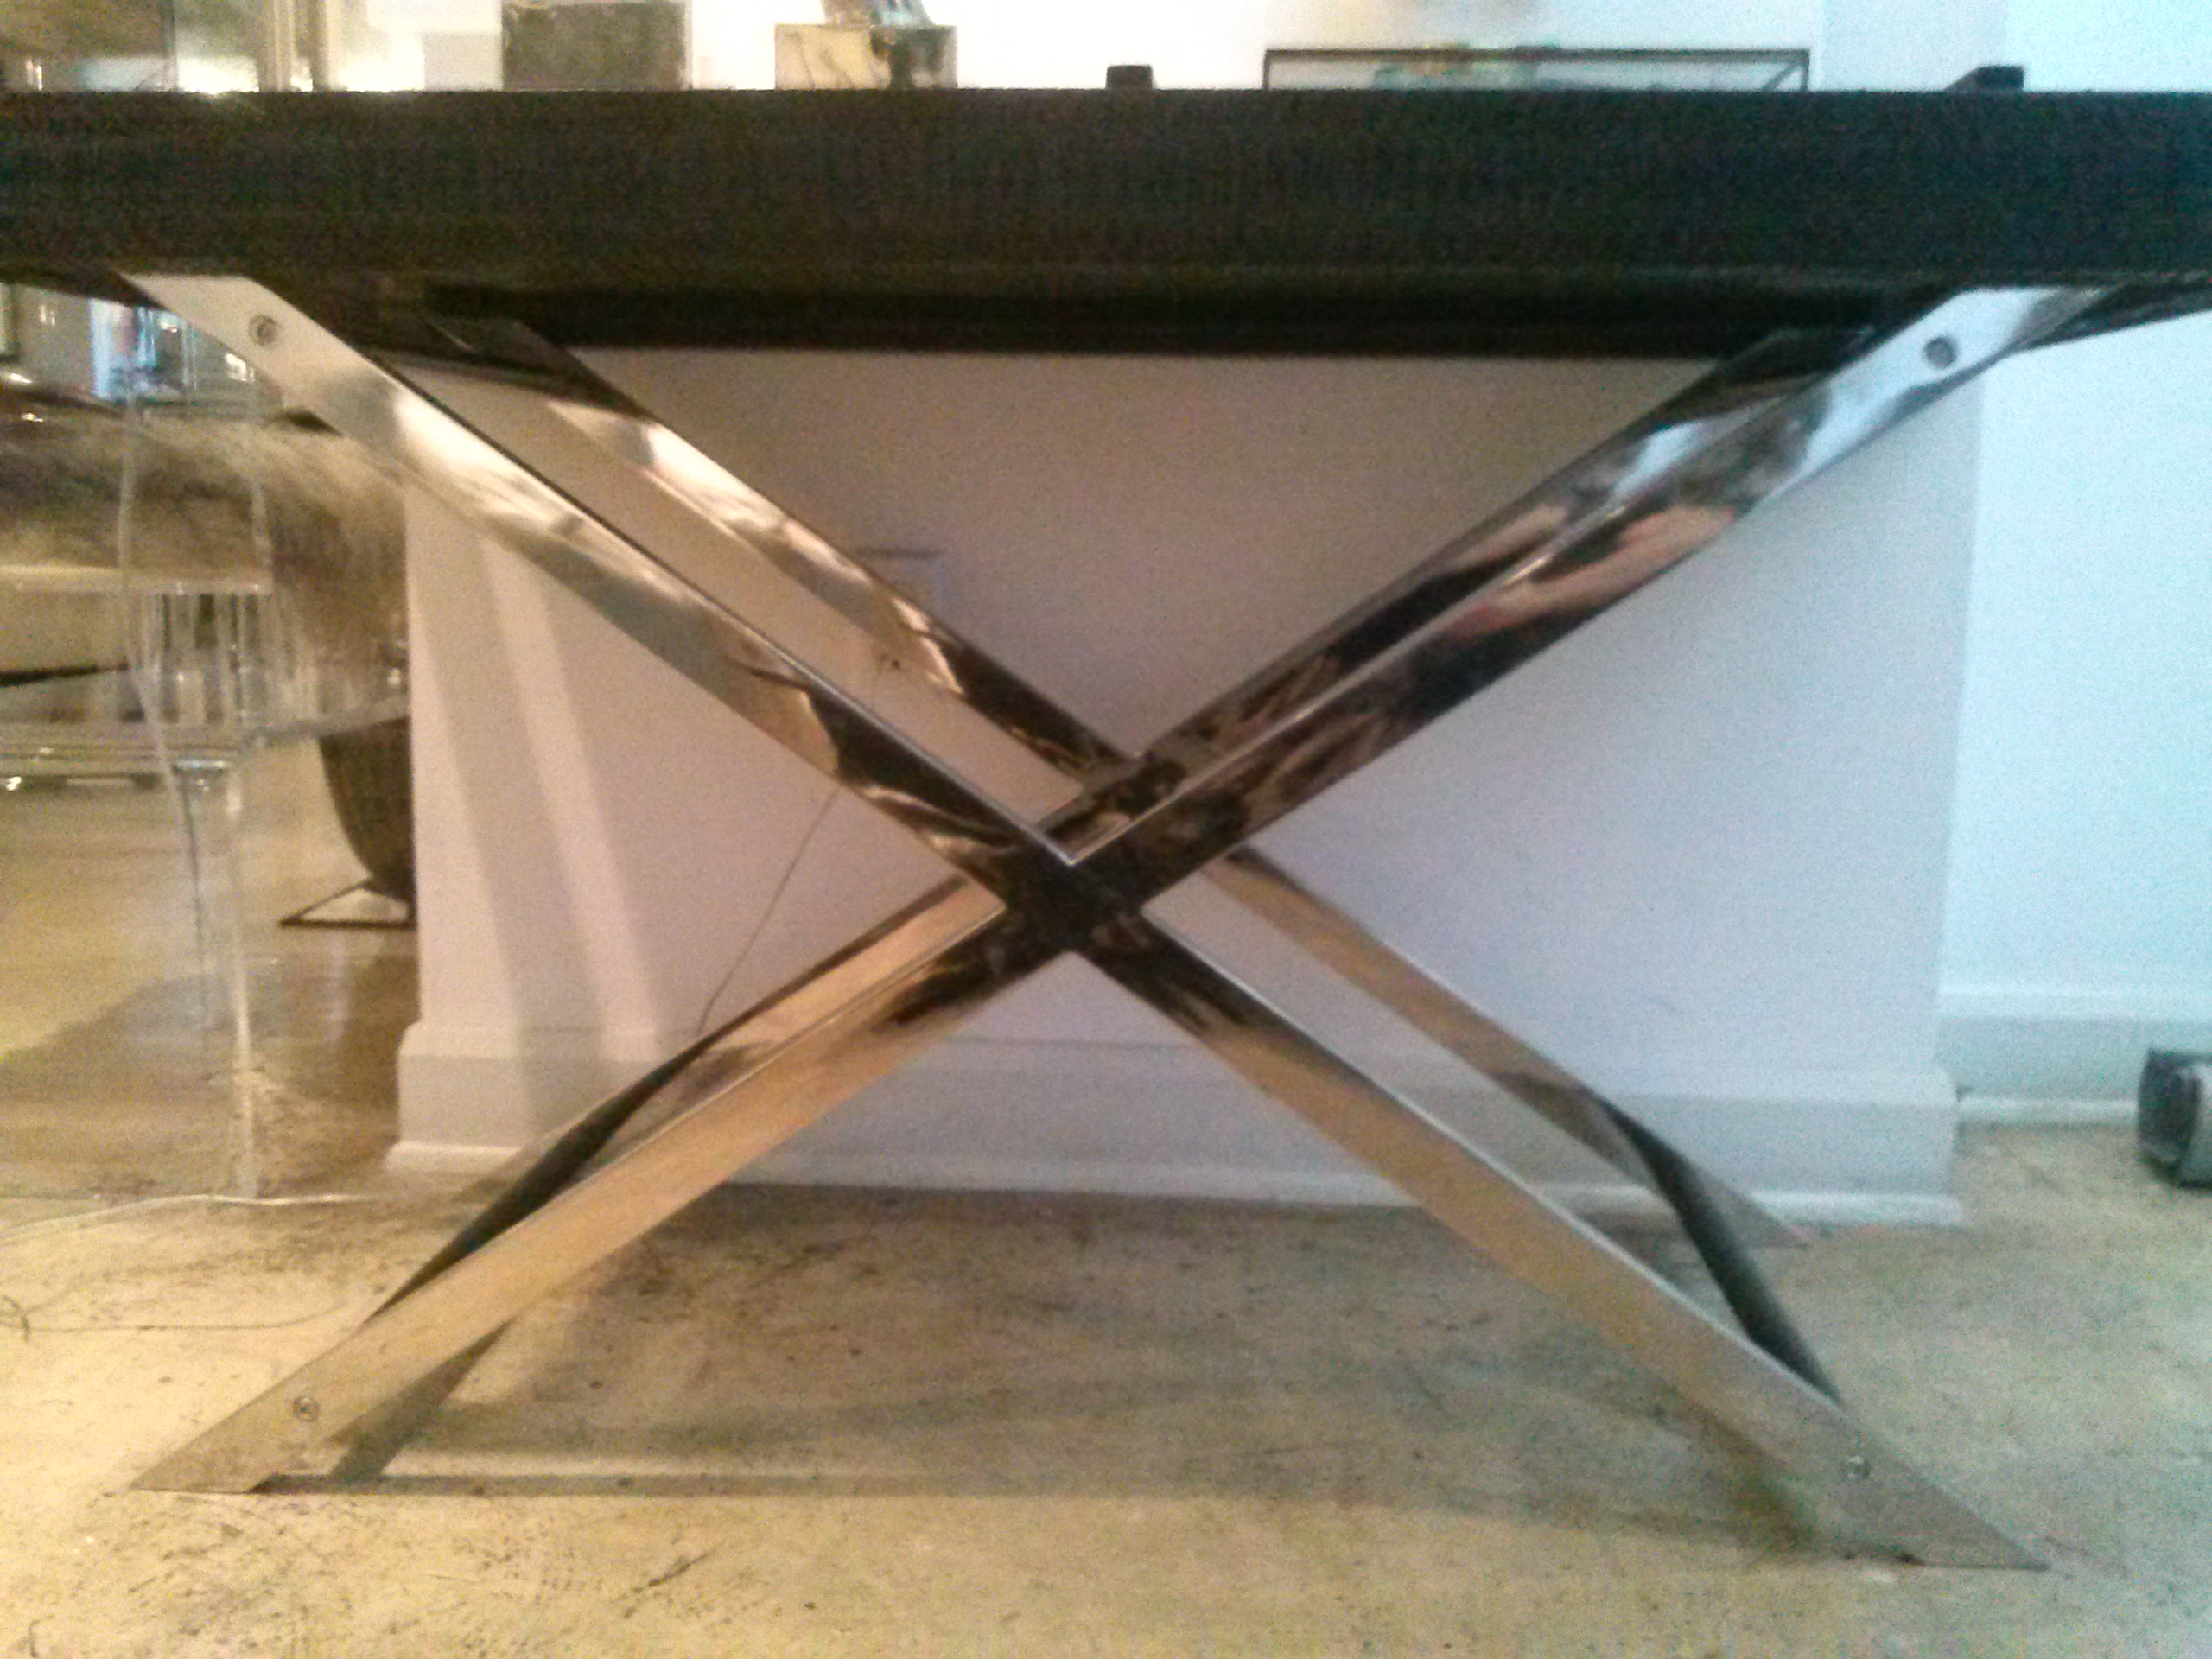 Custom Furniture, Stainless Steel Fabricator in Miami, Manufacturing, Metal Shop in Miami, Interior Design, Custom Metal Fabrication, Welding Services in Miami, Metal Staircase Handrails, DJ Booth, Store Display, Fixtures, Custom Counters, Steel Monkey Dream Shop Miami, Custom Furniture, Stainless Steel, Aluminum, Steel